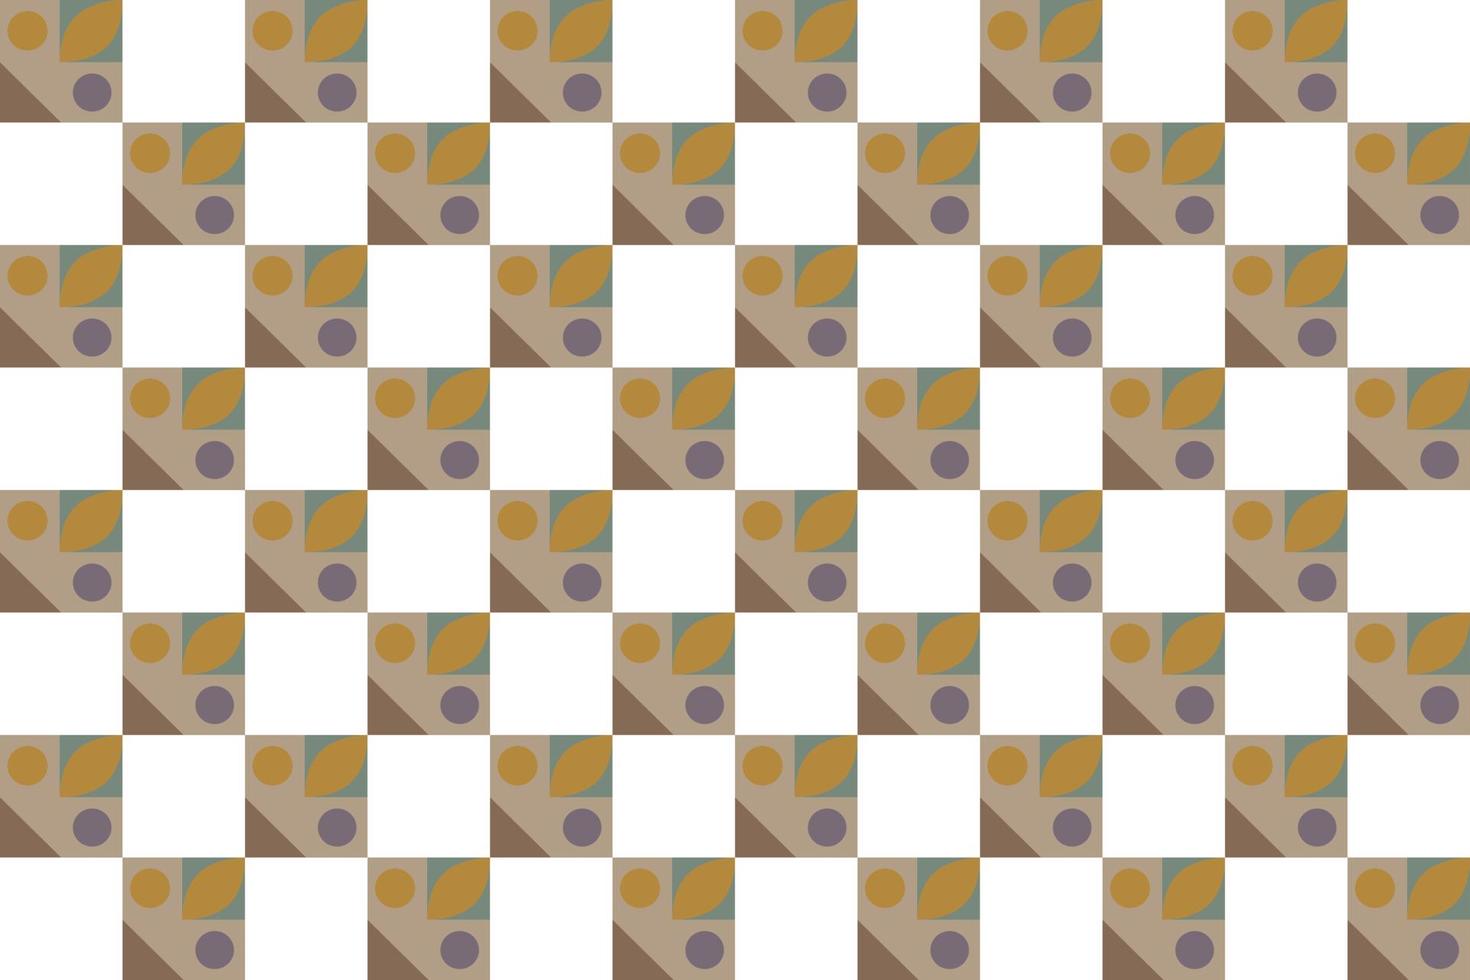 Checkers Pattern Vector Images is a pattern of modified stripes consisting of crossed horizontal and vertical lines which form squares.